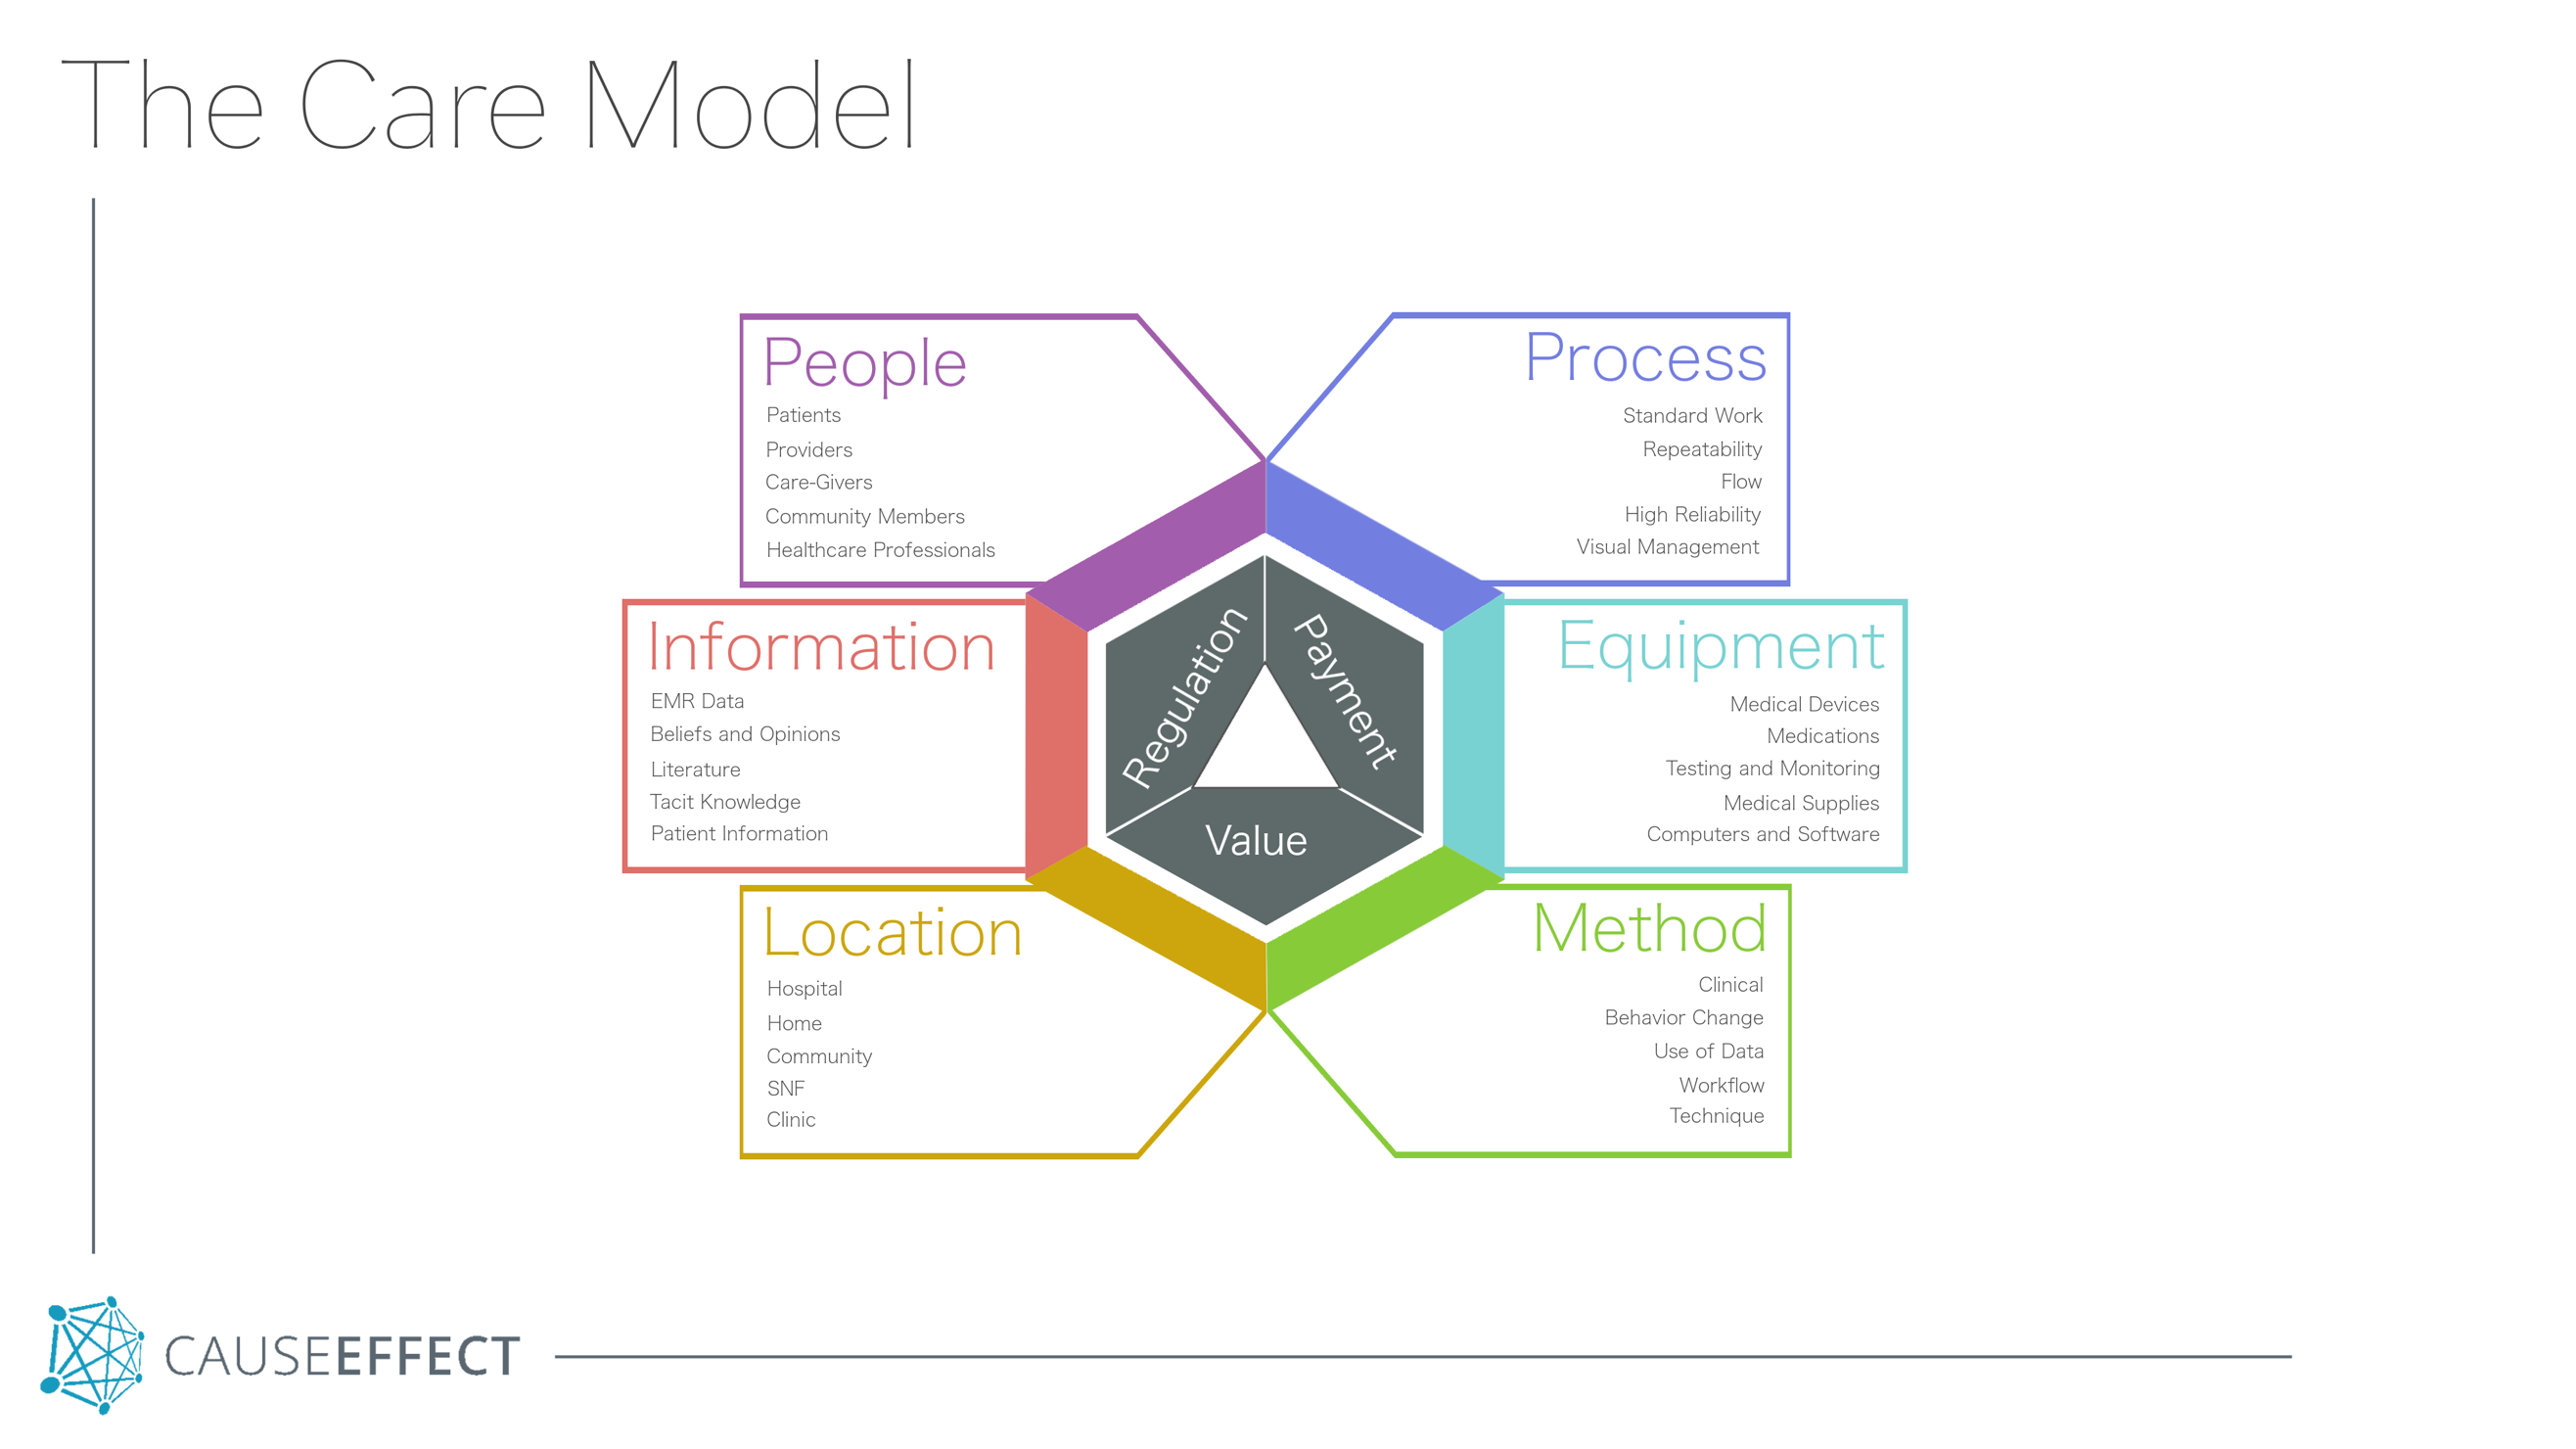 Care Model Components